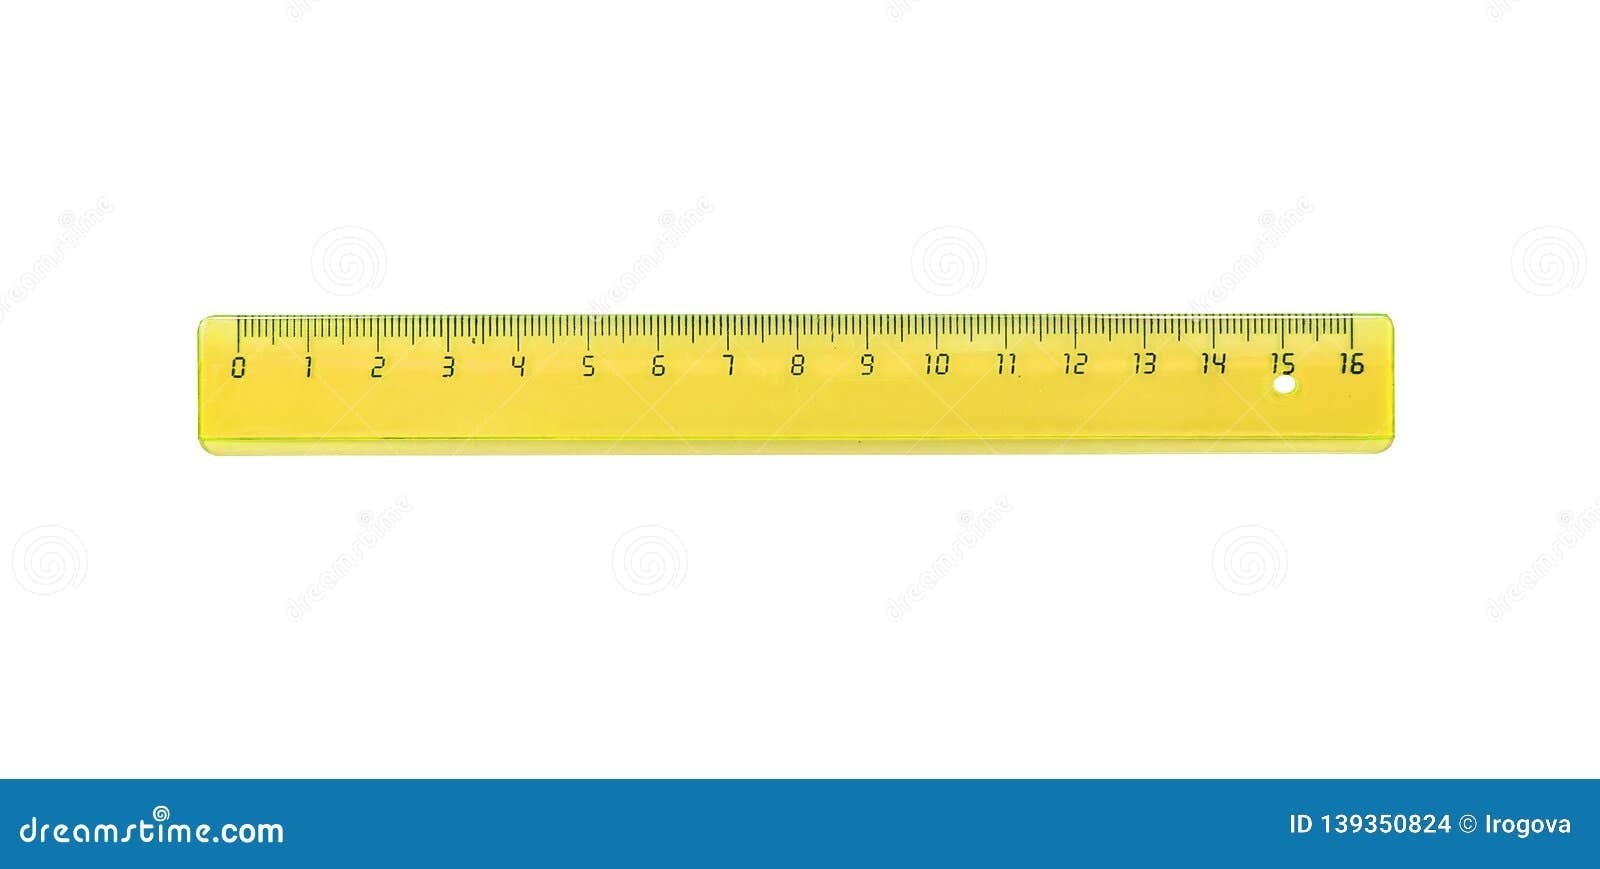 the yellow ruler is plastic for measuring centimeters